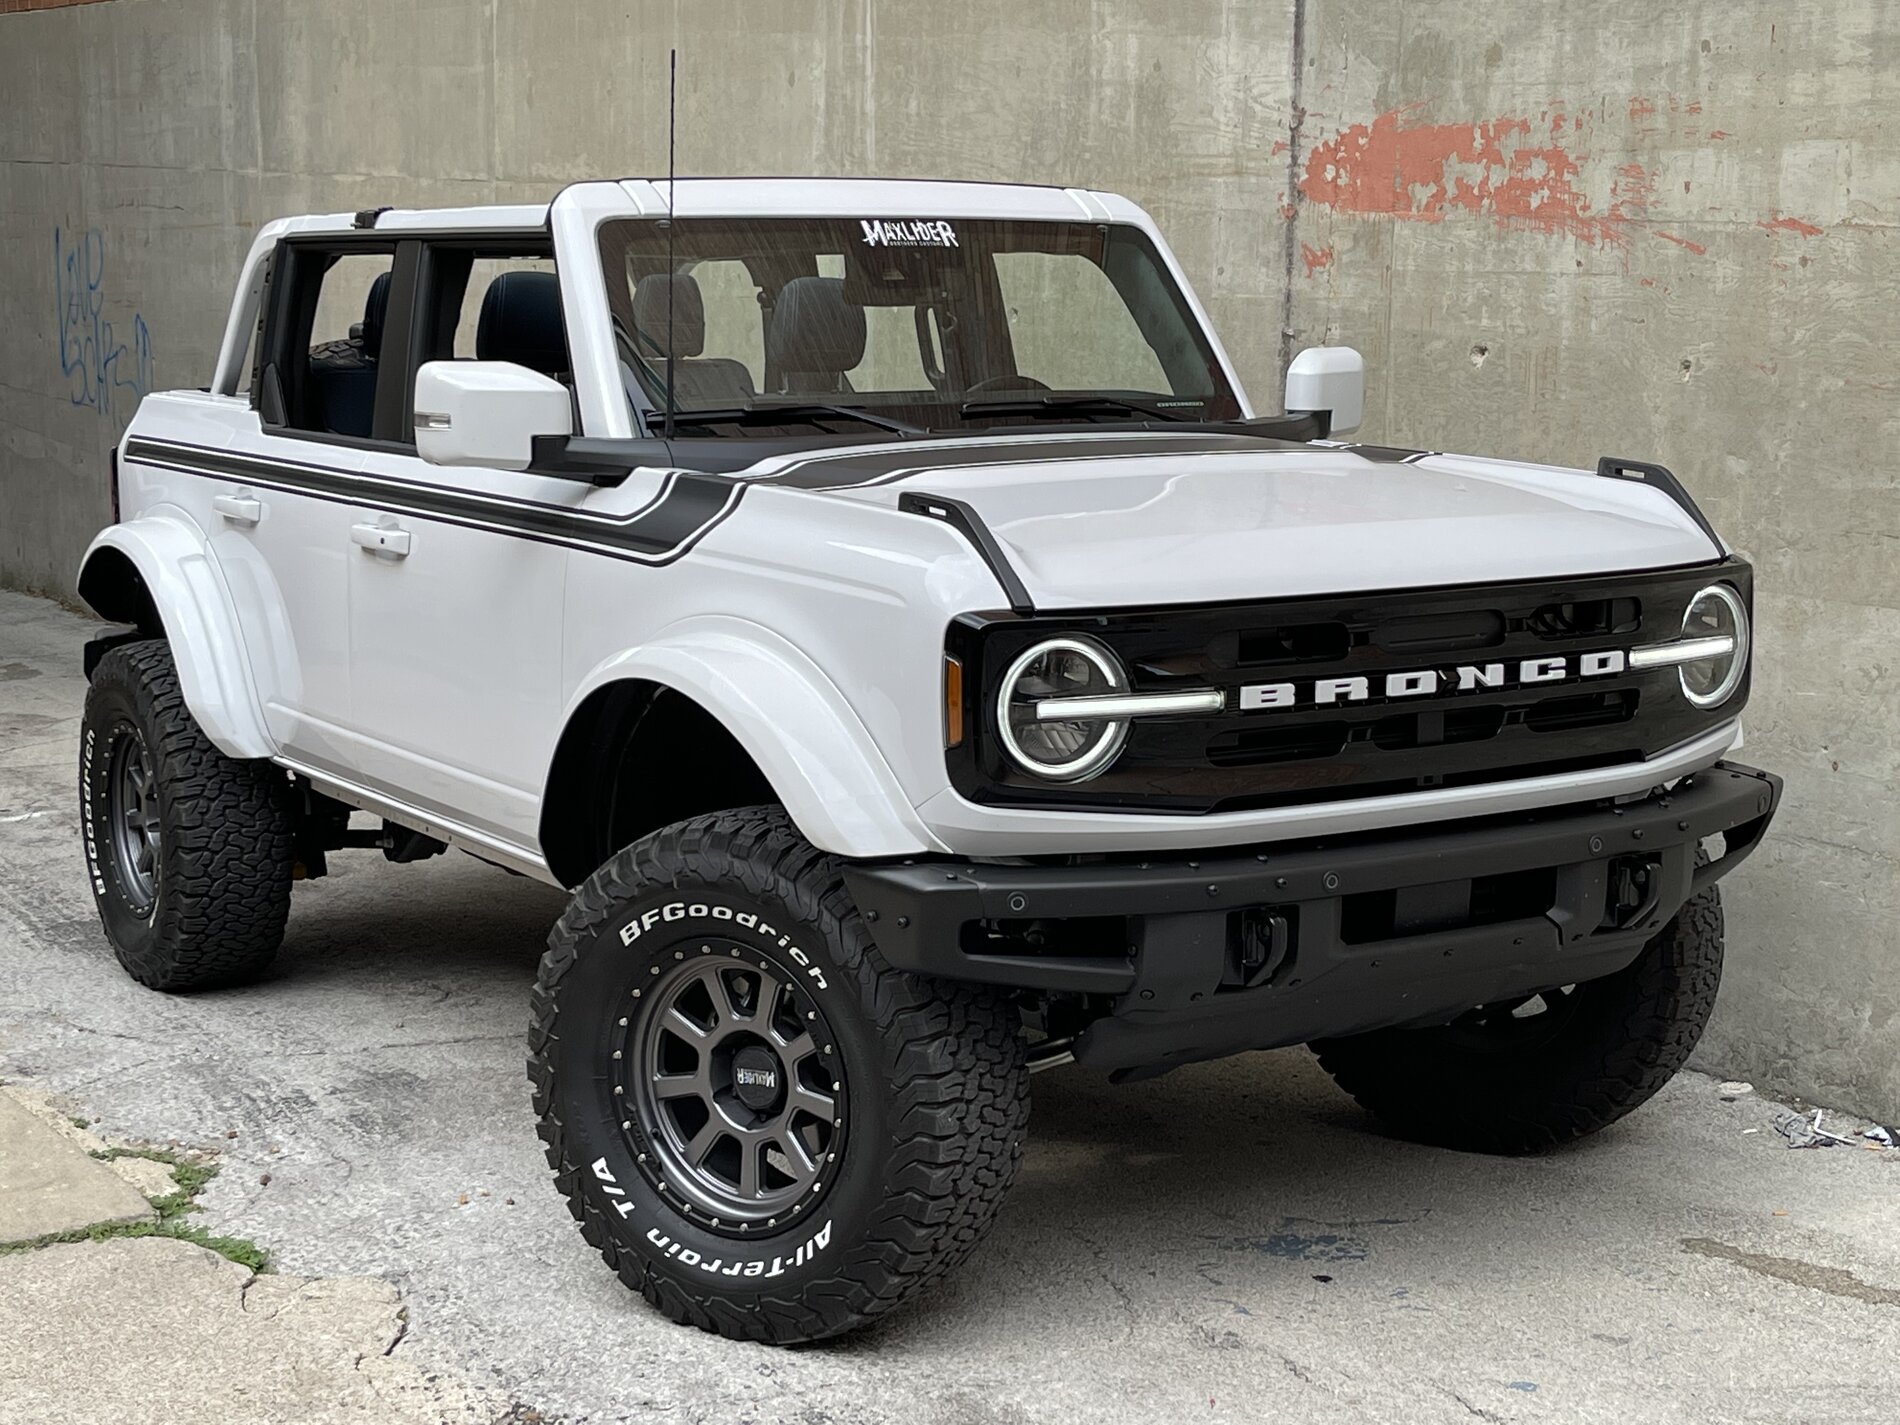 2021 Ford Bronco Clydesdale II Is a Cool Tribute to a Vintage 4Door